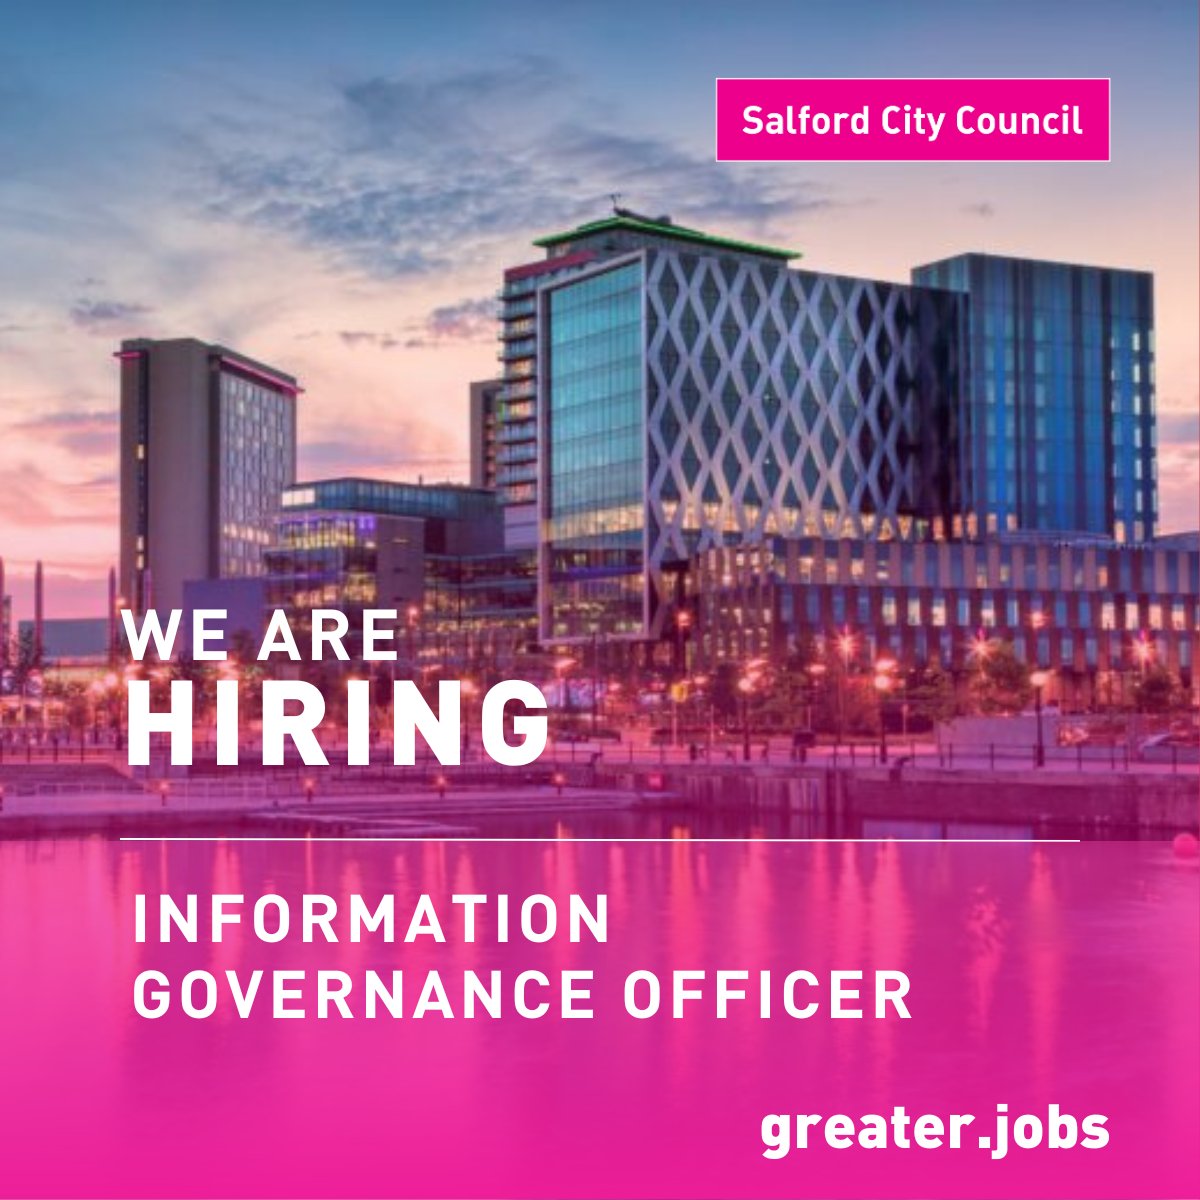 #HiringAlert Information Governance Officer

Are you passionate about information governance, data protection, and compliance? Apply now to be part of a council with huge ambitions for its city, residents and businesses!

Learn more and apply by 12 May! (Link in comments)